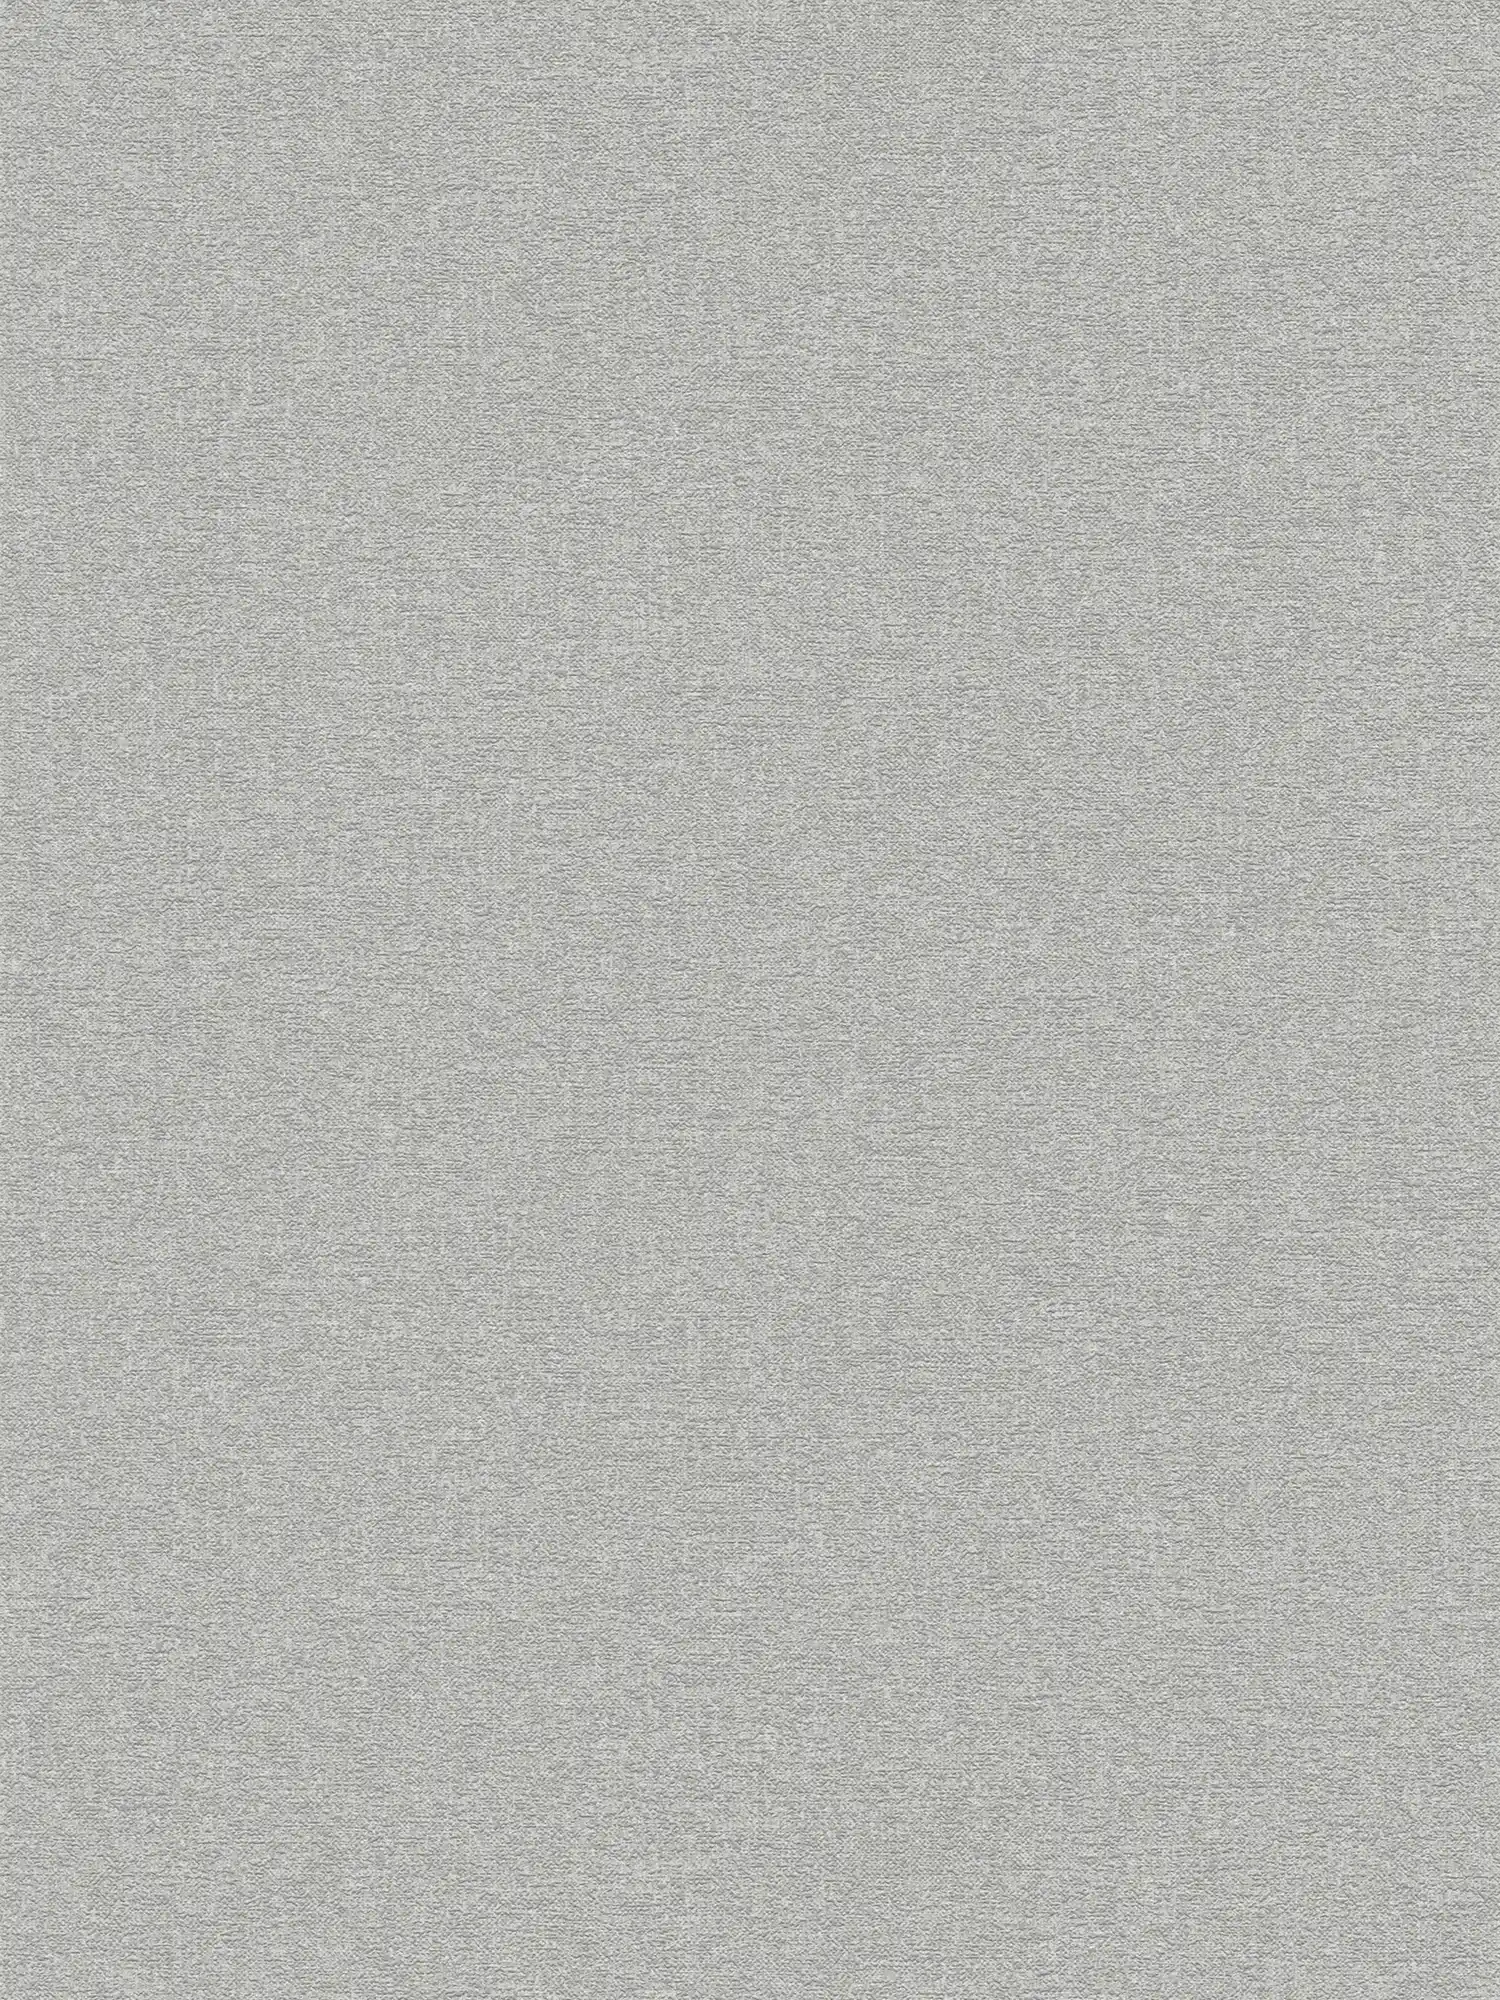 Non-woven wallpaper plain with light textured pattern - grey
